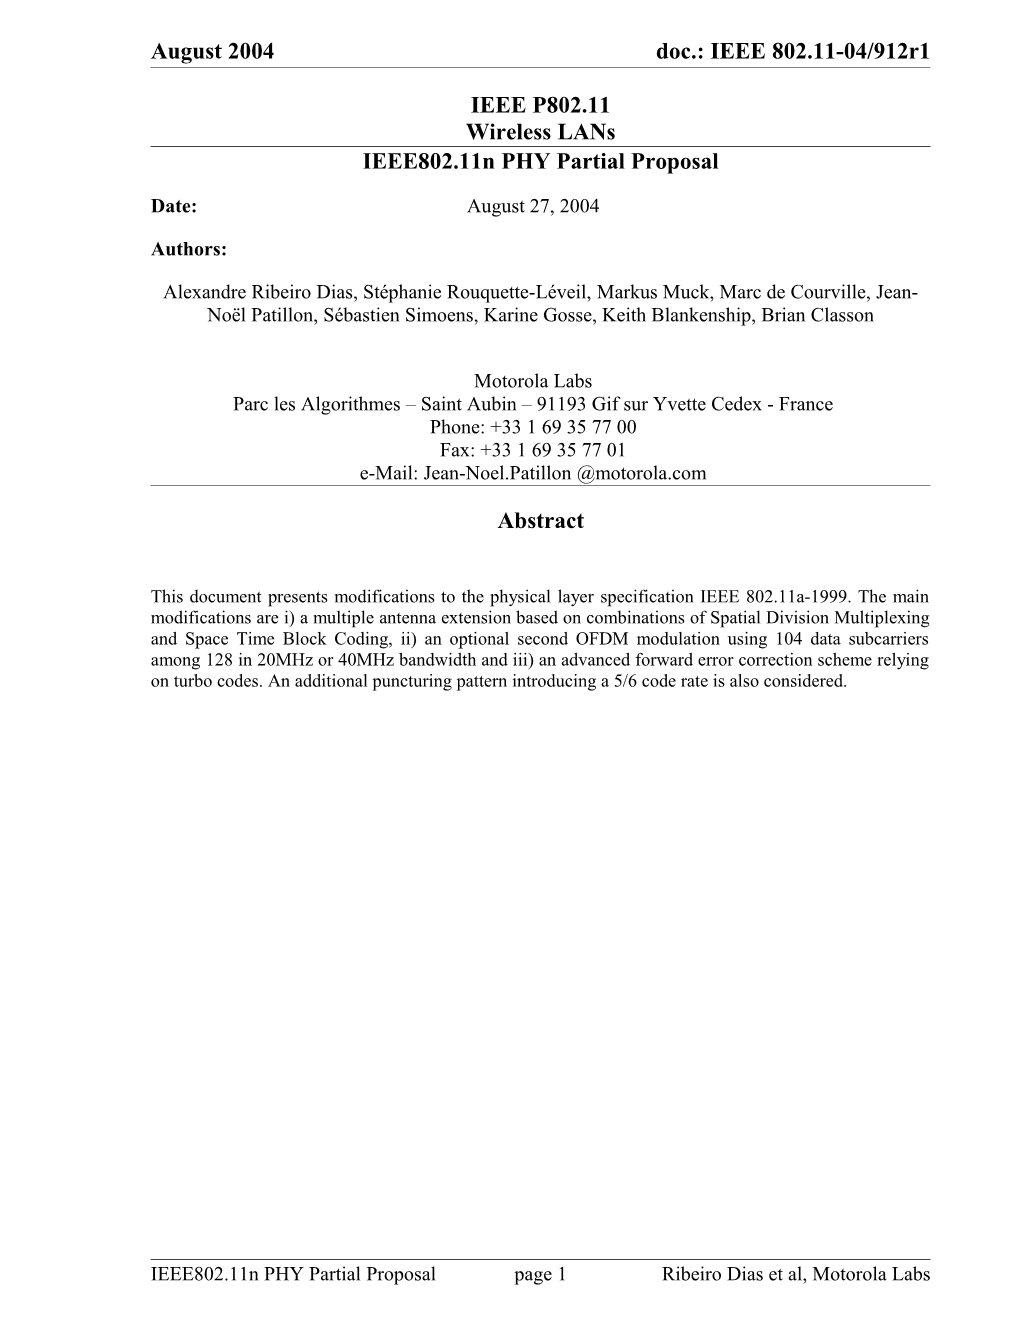 IEEE802.11N PHY Partial Proposal